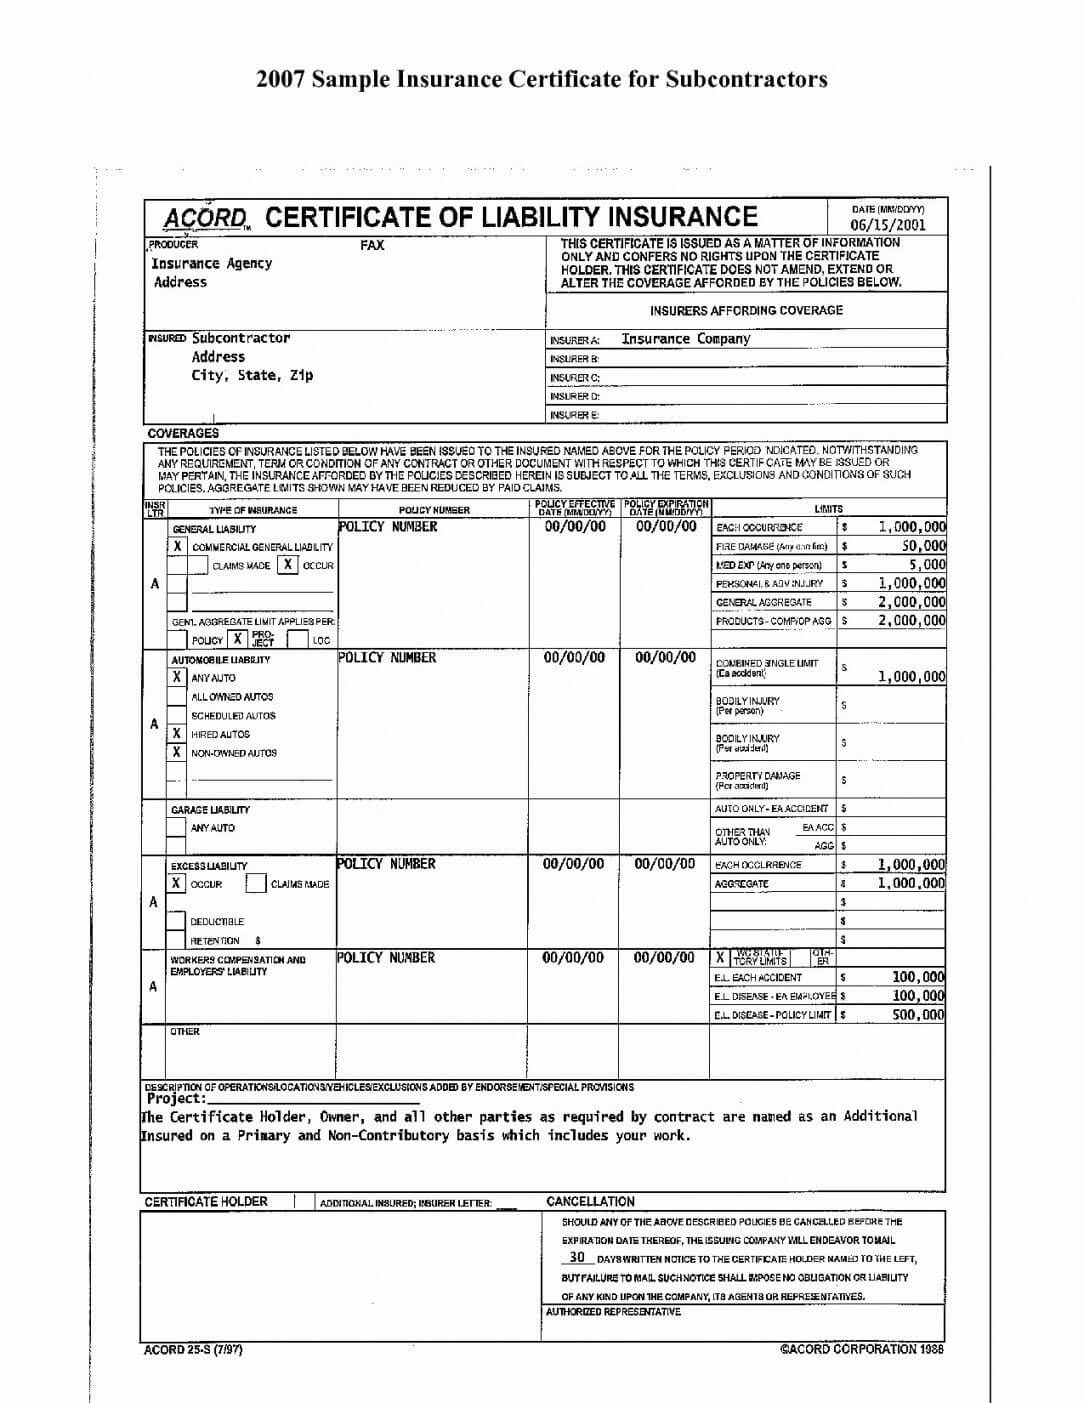 Editable Form Ificate Of Liability Insurance What Is Inside Acord Insurance Certificate Template